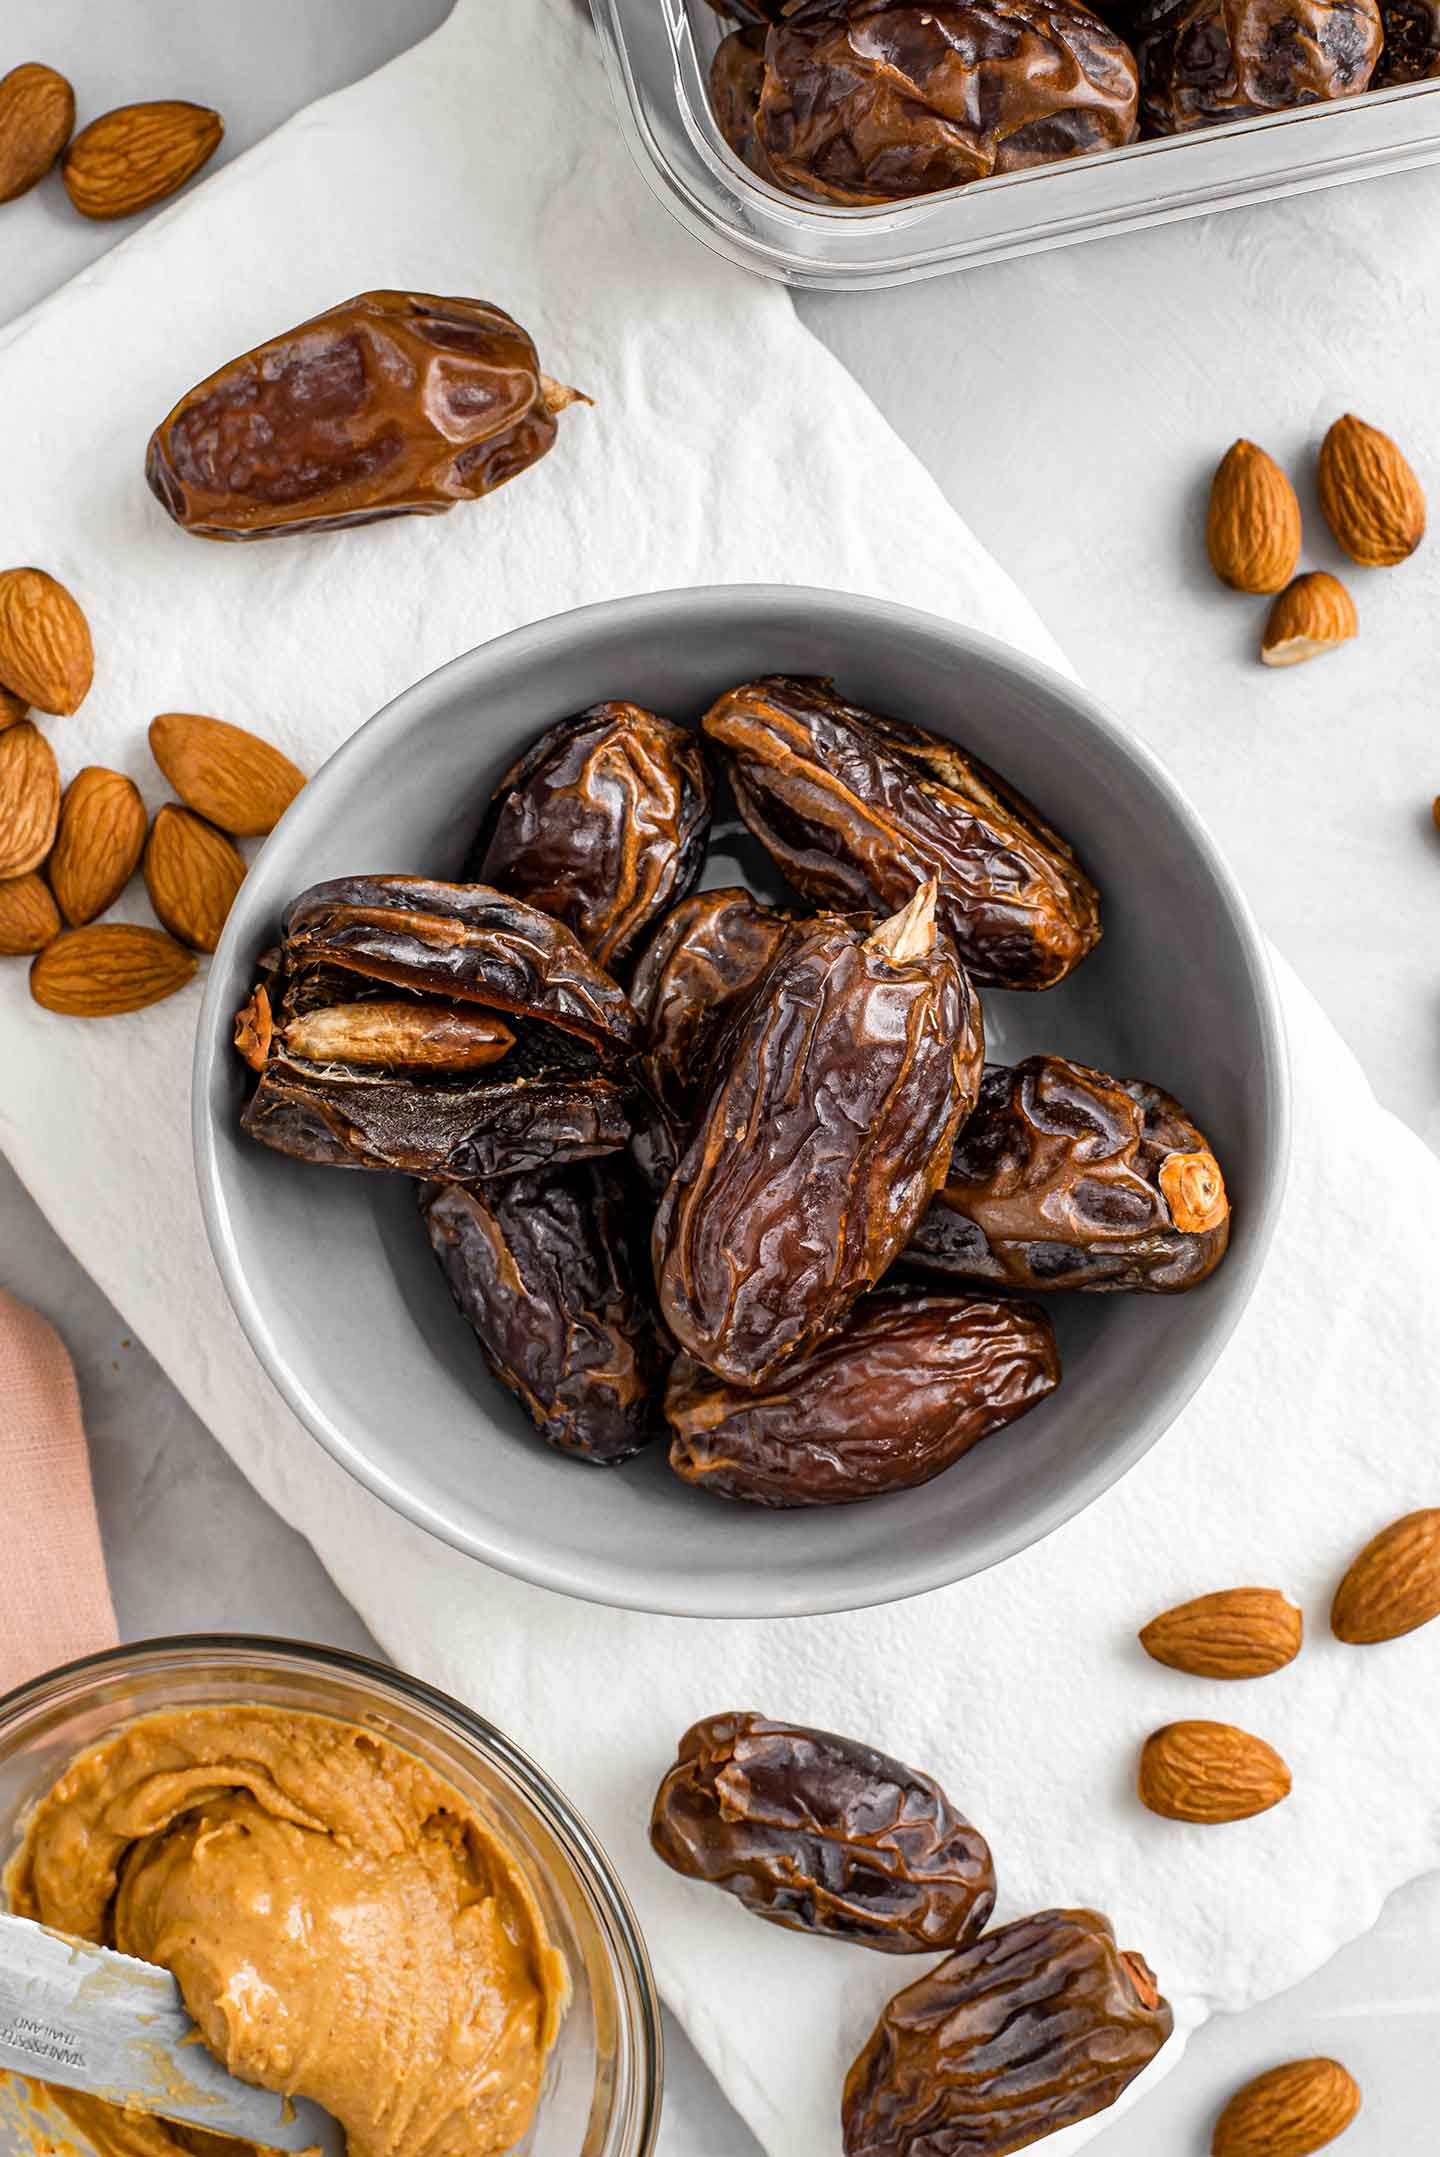 Top down view of dates filling a small bowl. One date is sliced open, exposing the put inside. Peanut butter and almonds surround the bowl of dates.